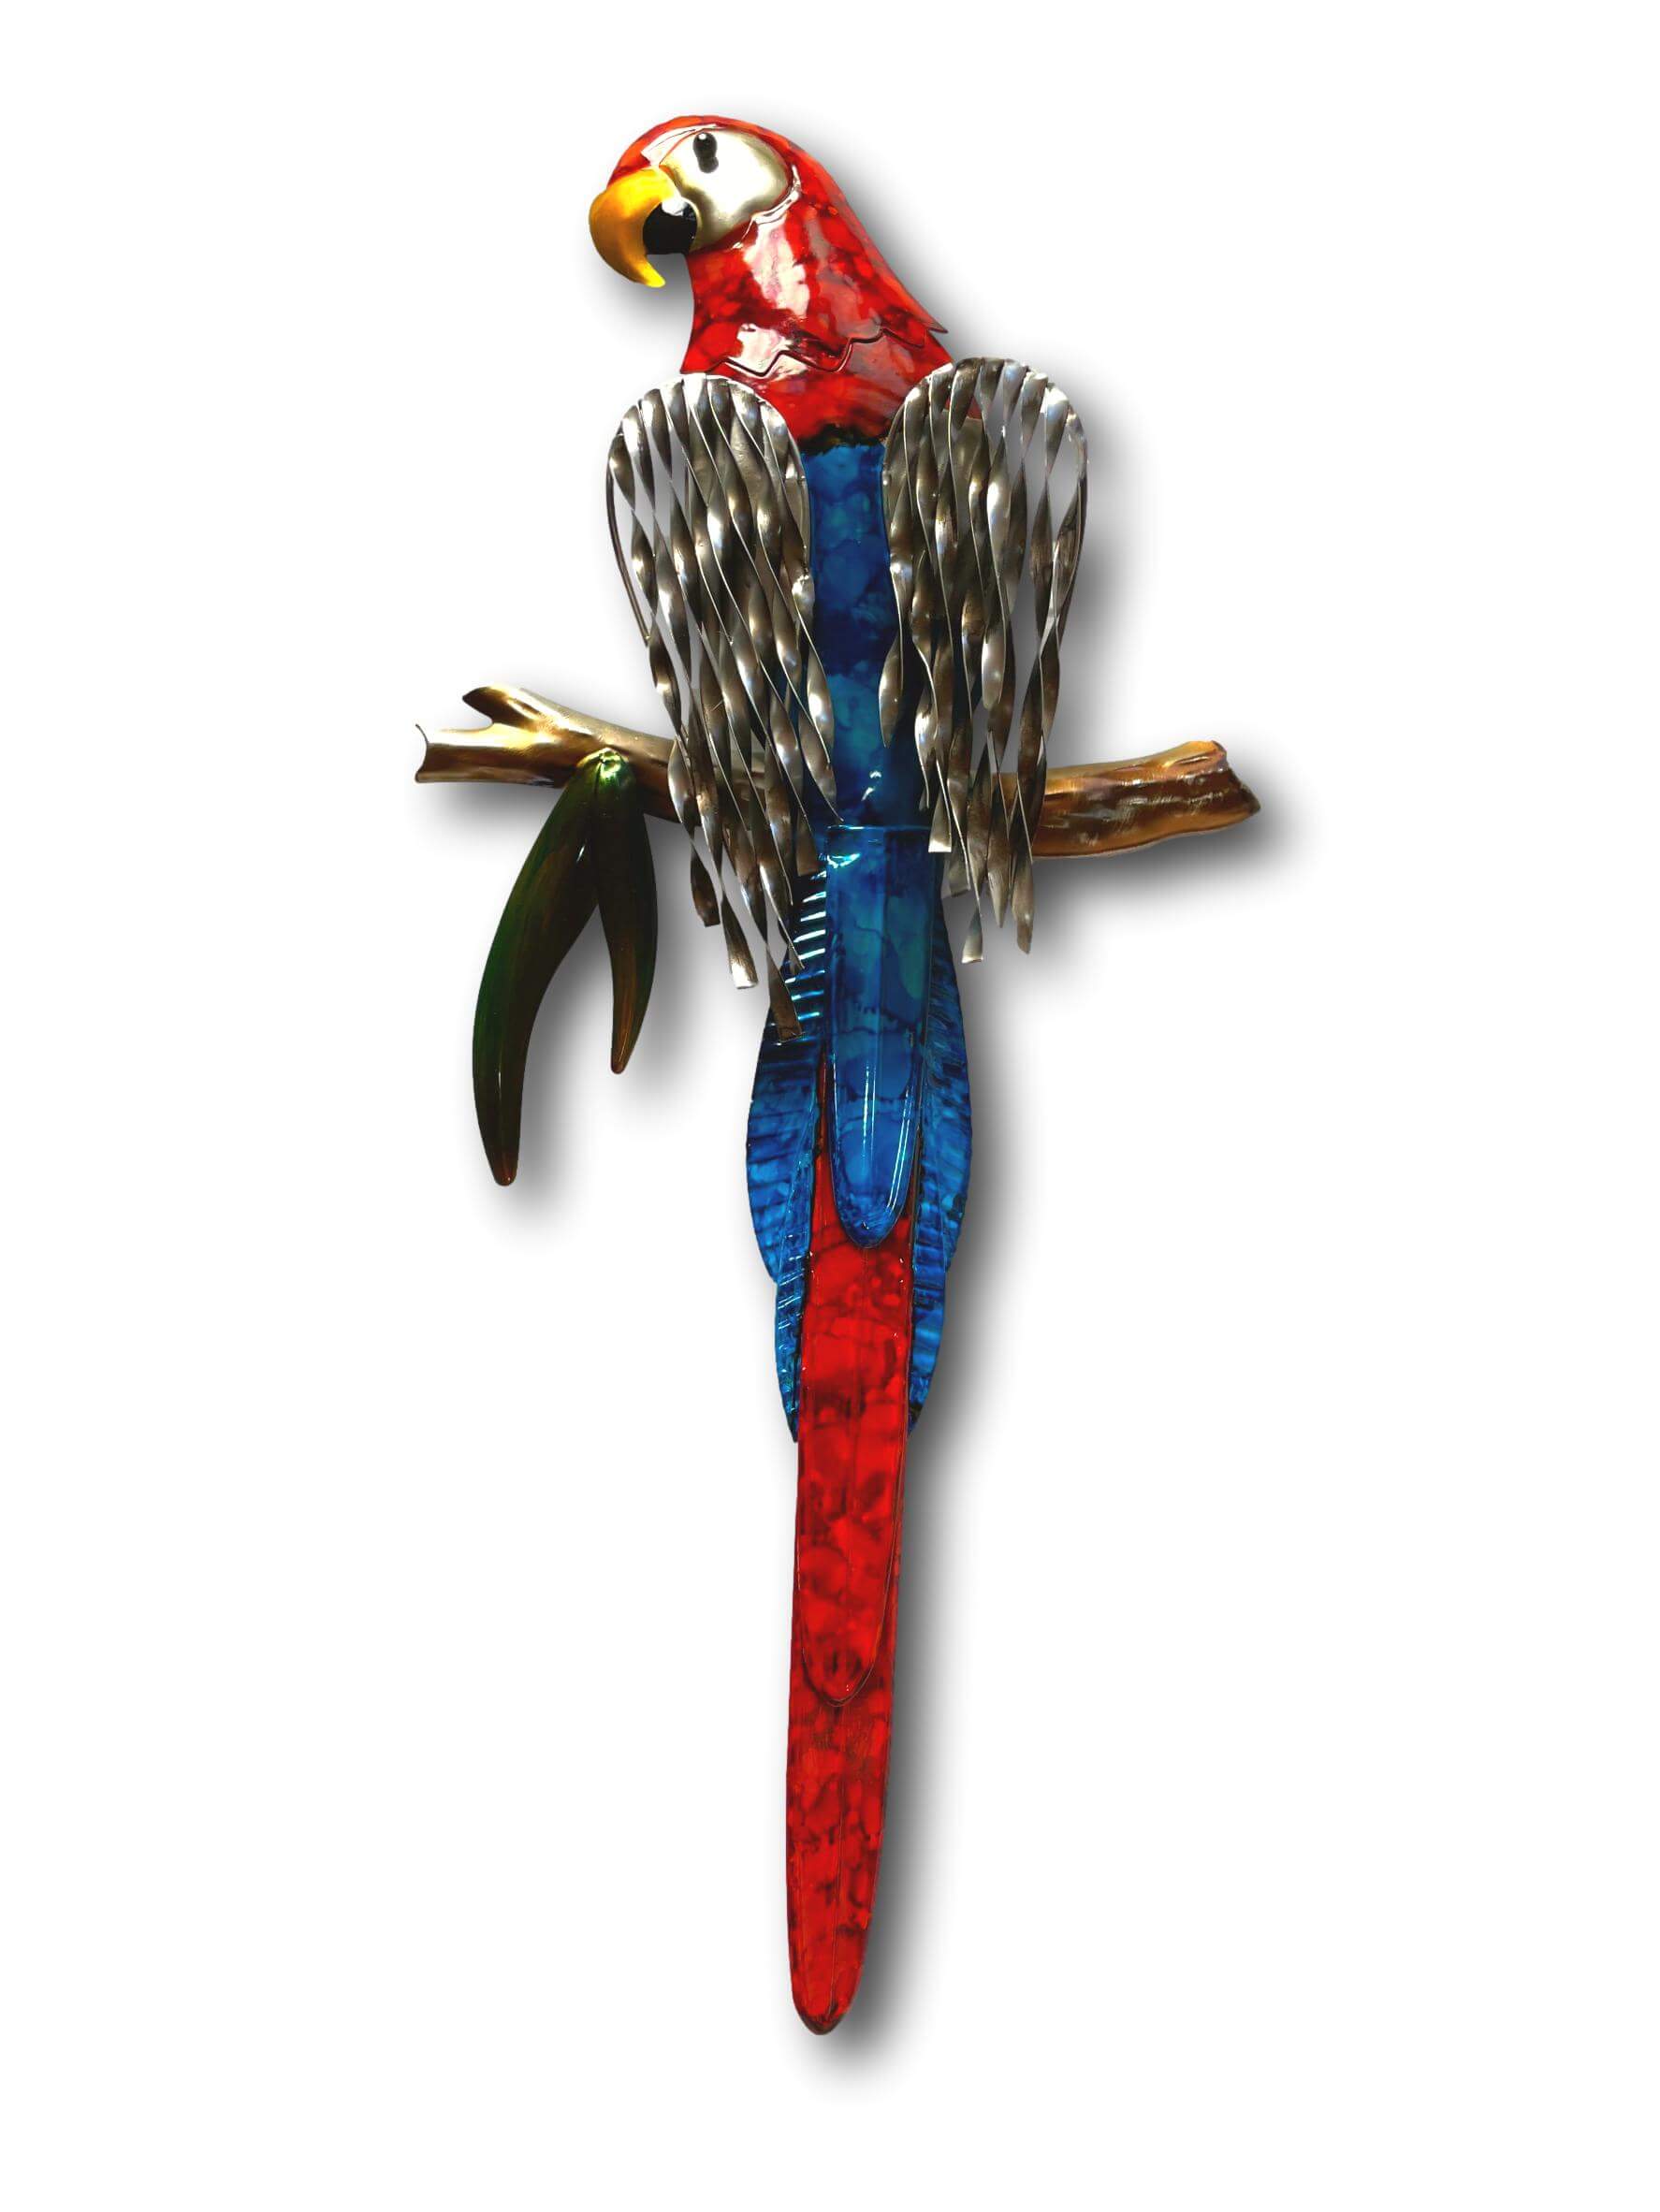 TWO COLOURFUL MACAW PARROTS WALL ART SET - HANDMADE METAL ART + SINGING BOWLS AND MEDITATION